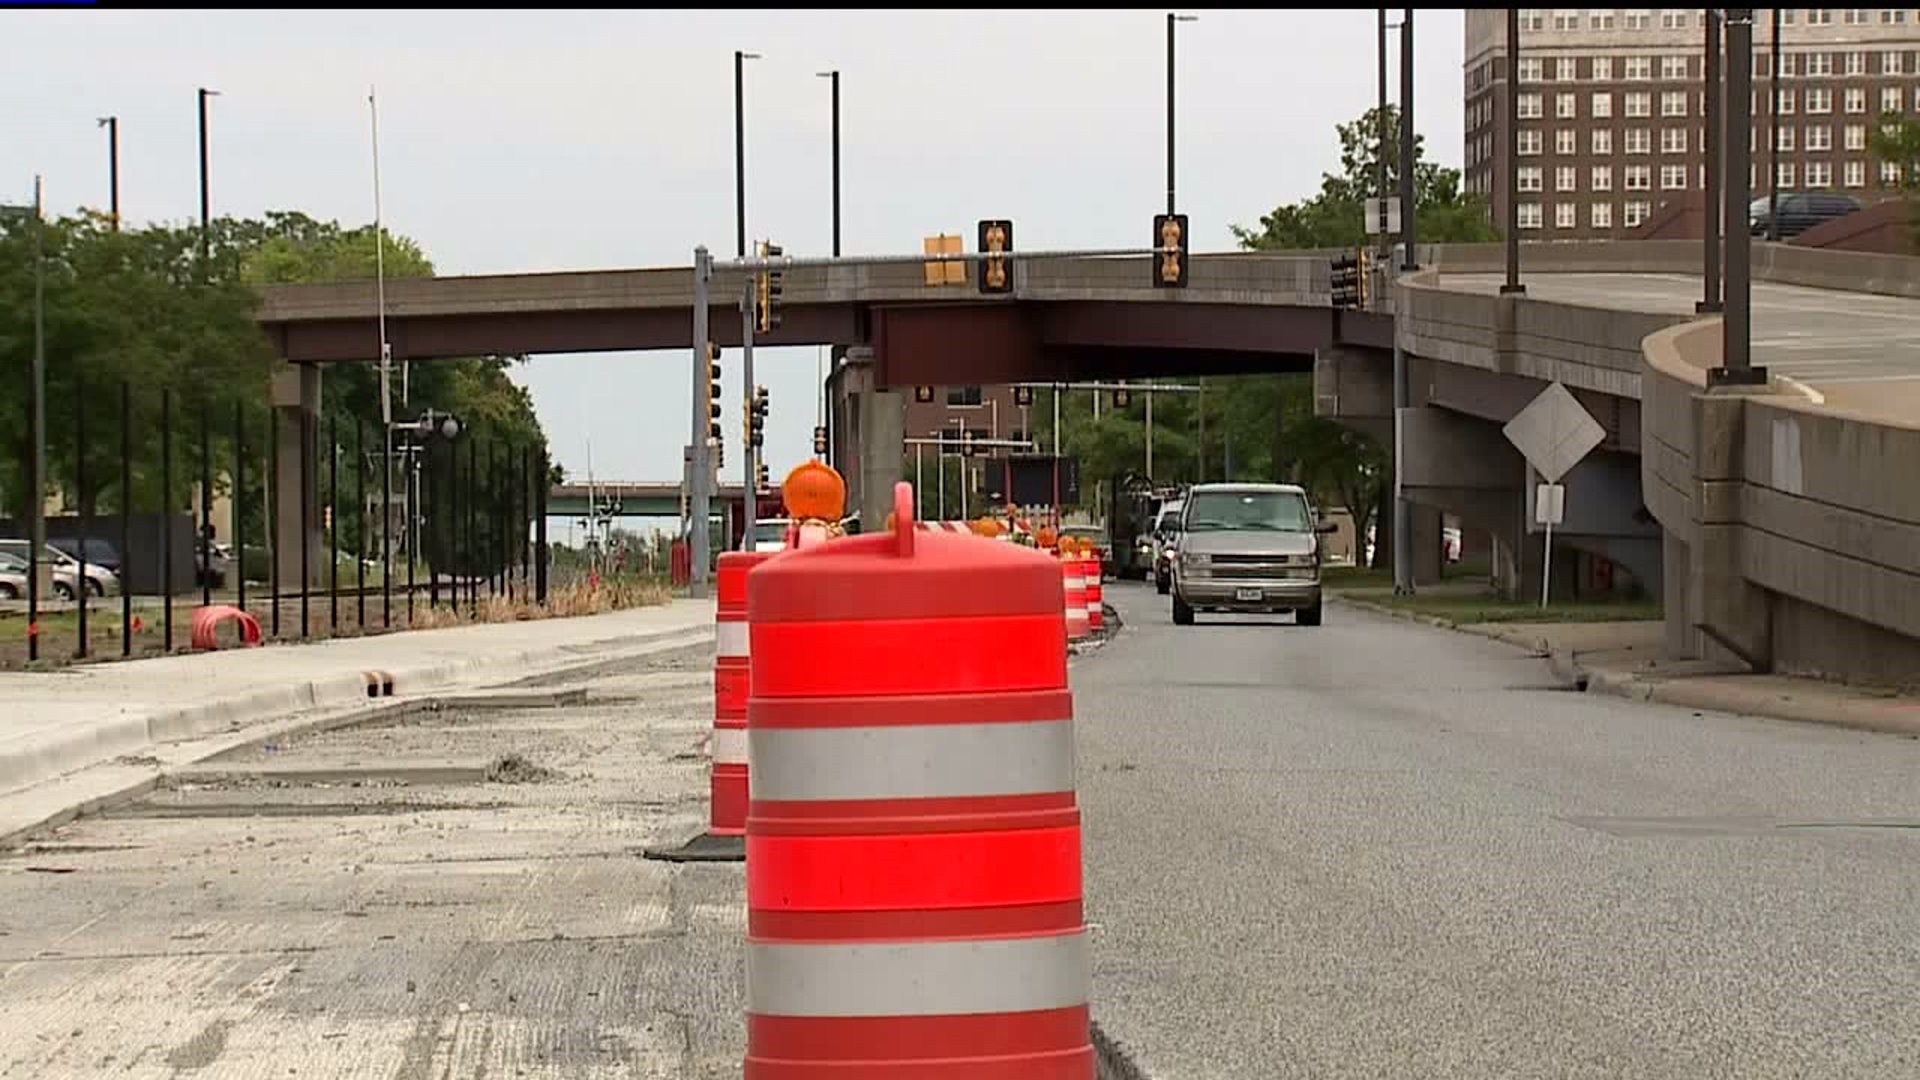 Arsenal access point closed in Moline for bridge work